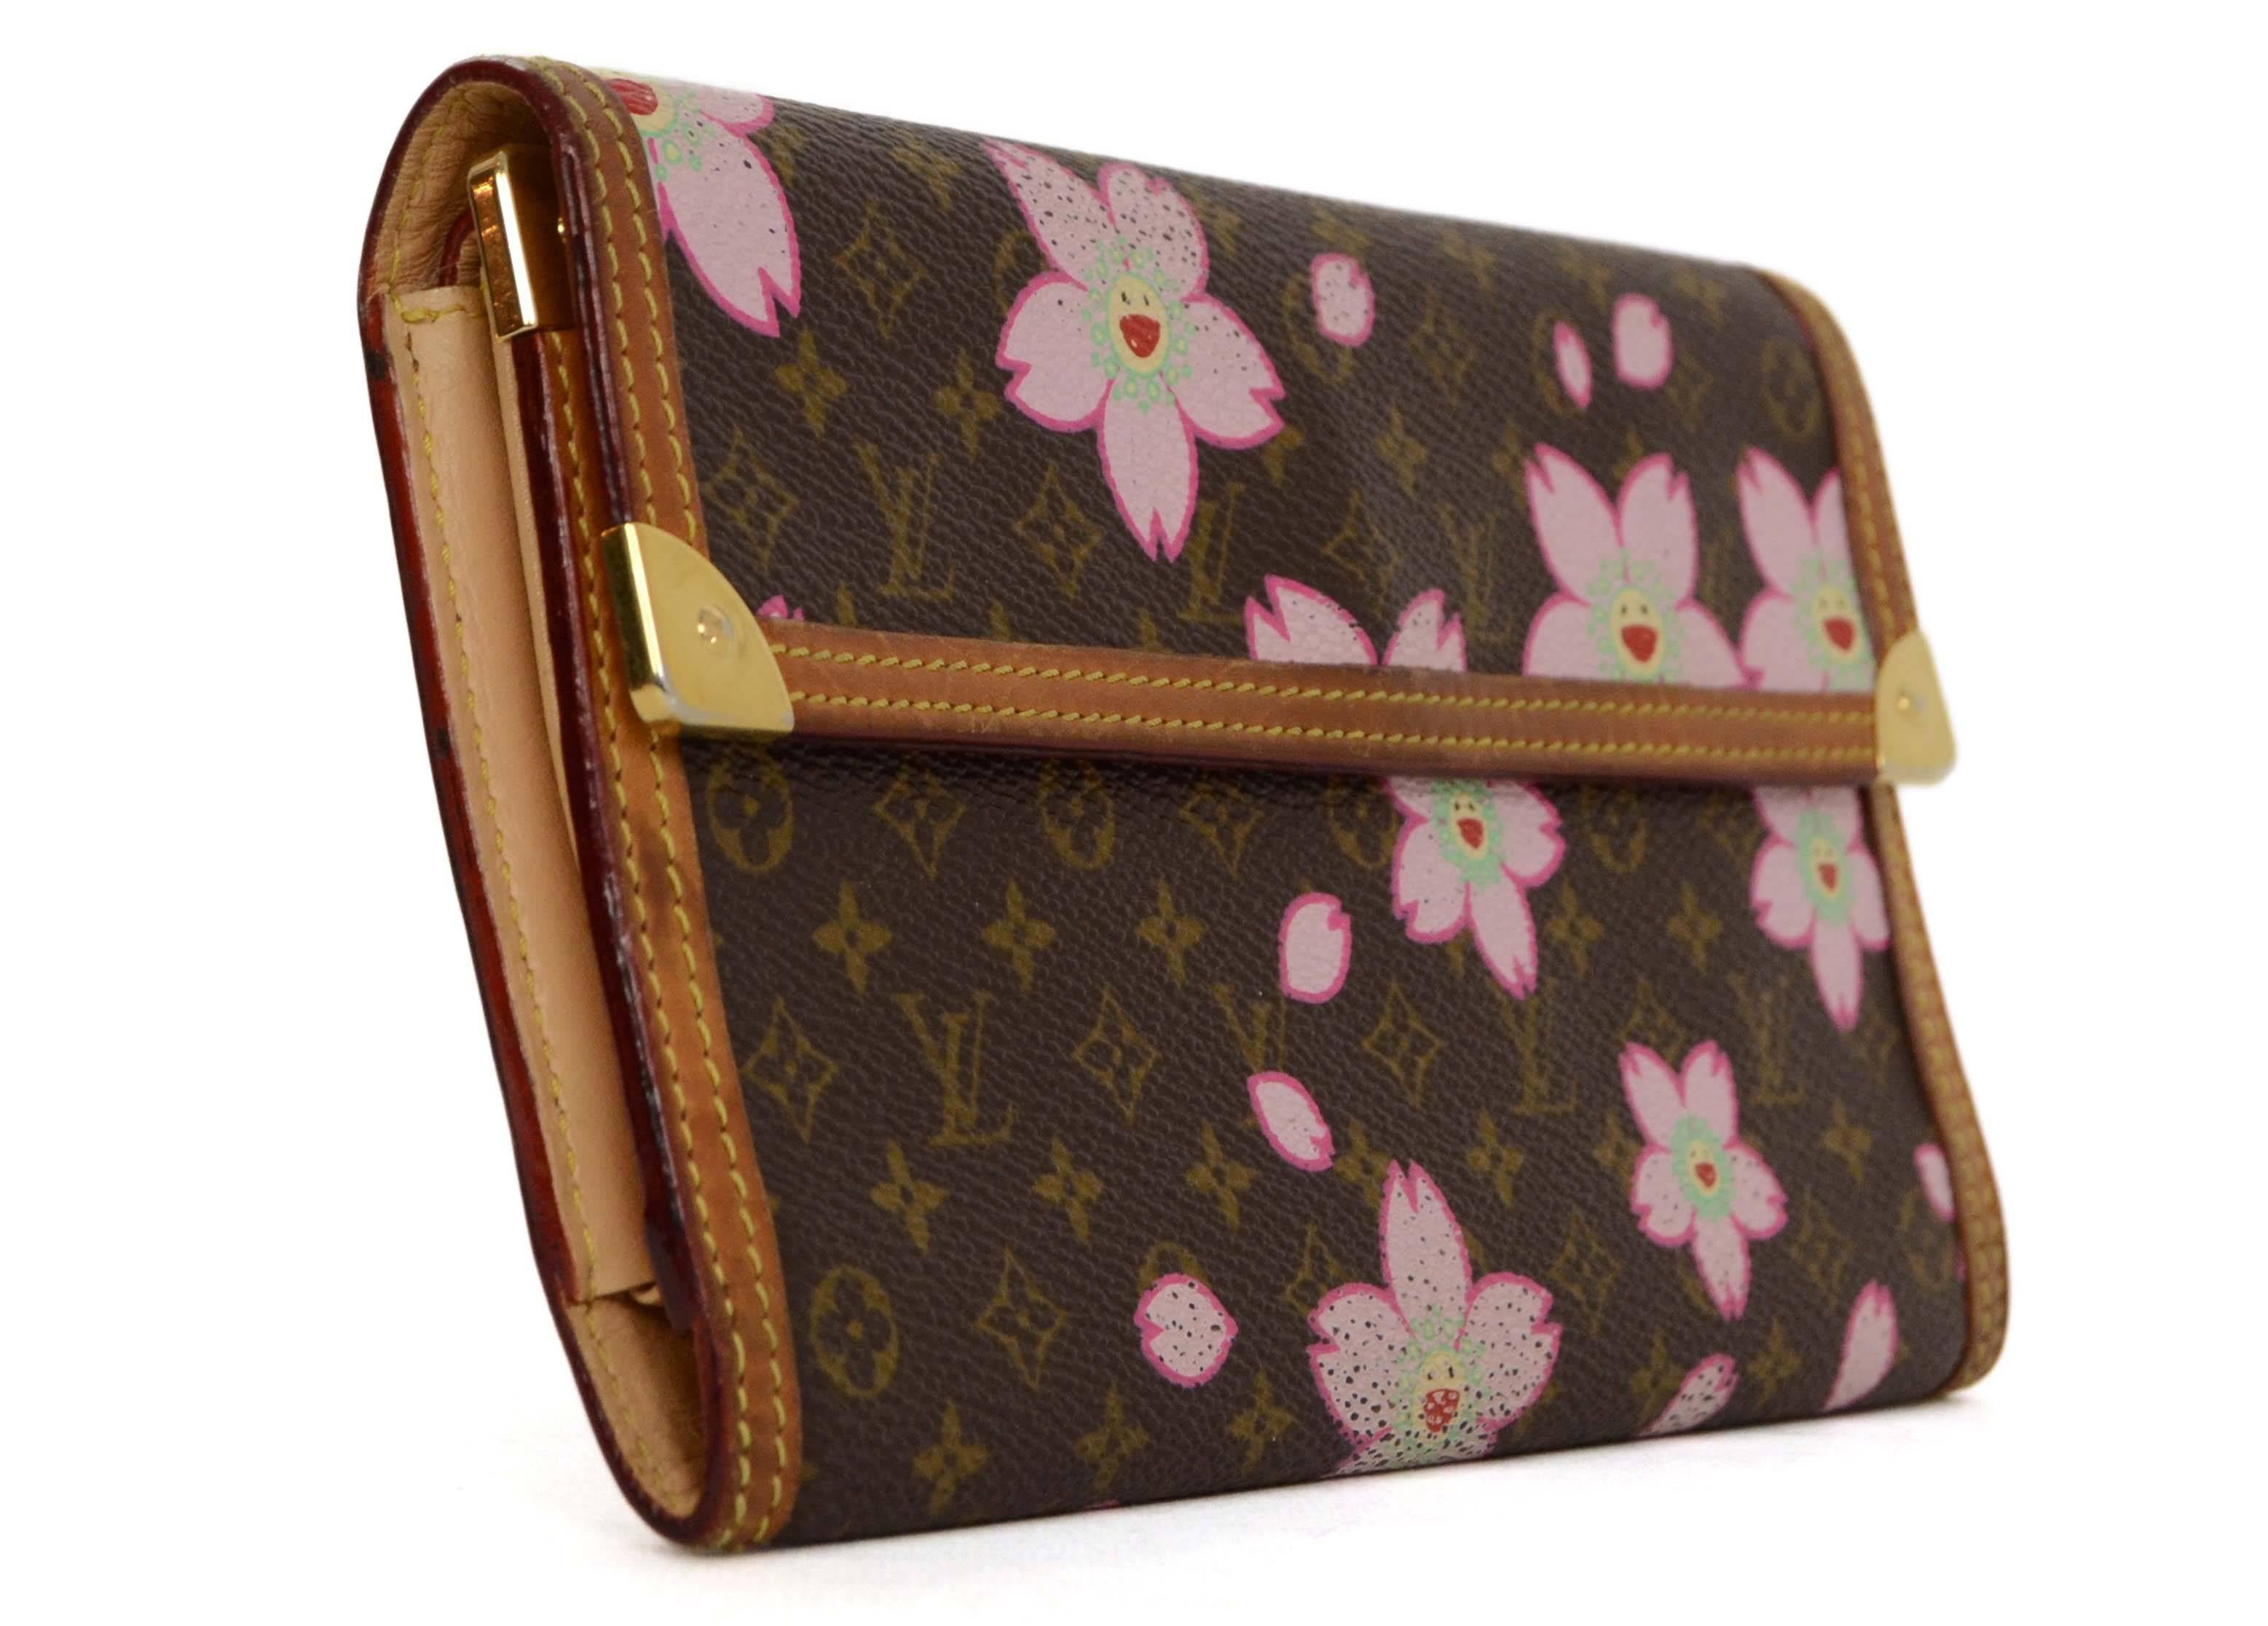 Louis Vuitton Monogram Cherry Blossom Long Wallet 
Features small pink cherry blossoms printed throughout
Made In: France
Year of Production: 2003
Color: Brown, tan, pink and goldtone
Hardware: Goldtone
Materials: Coated canvas, leather and